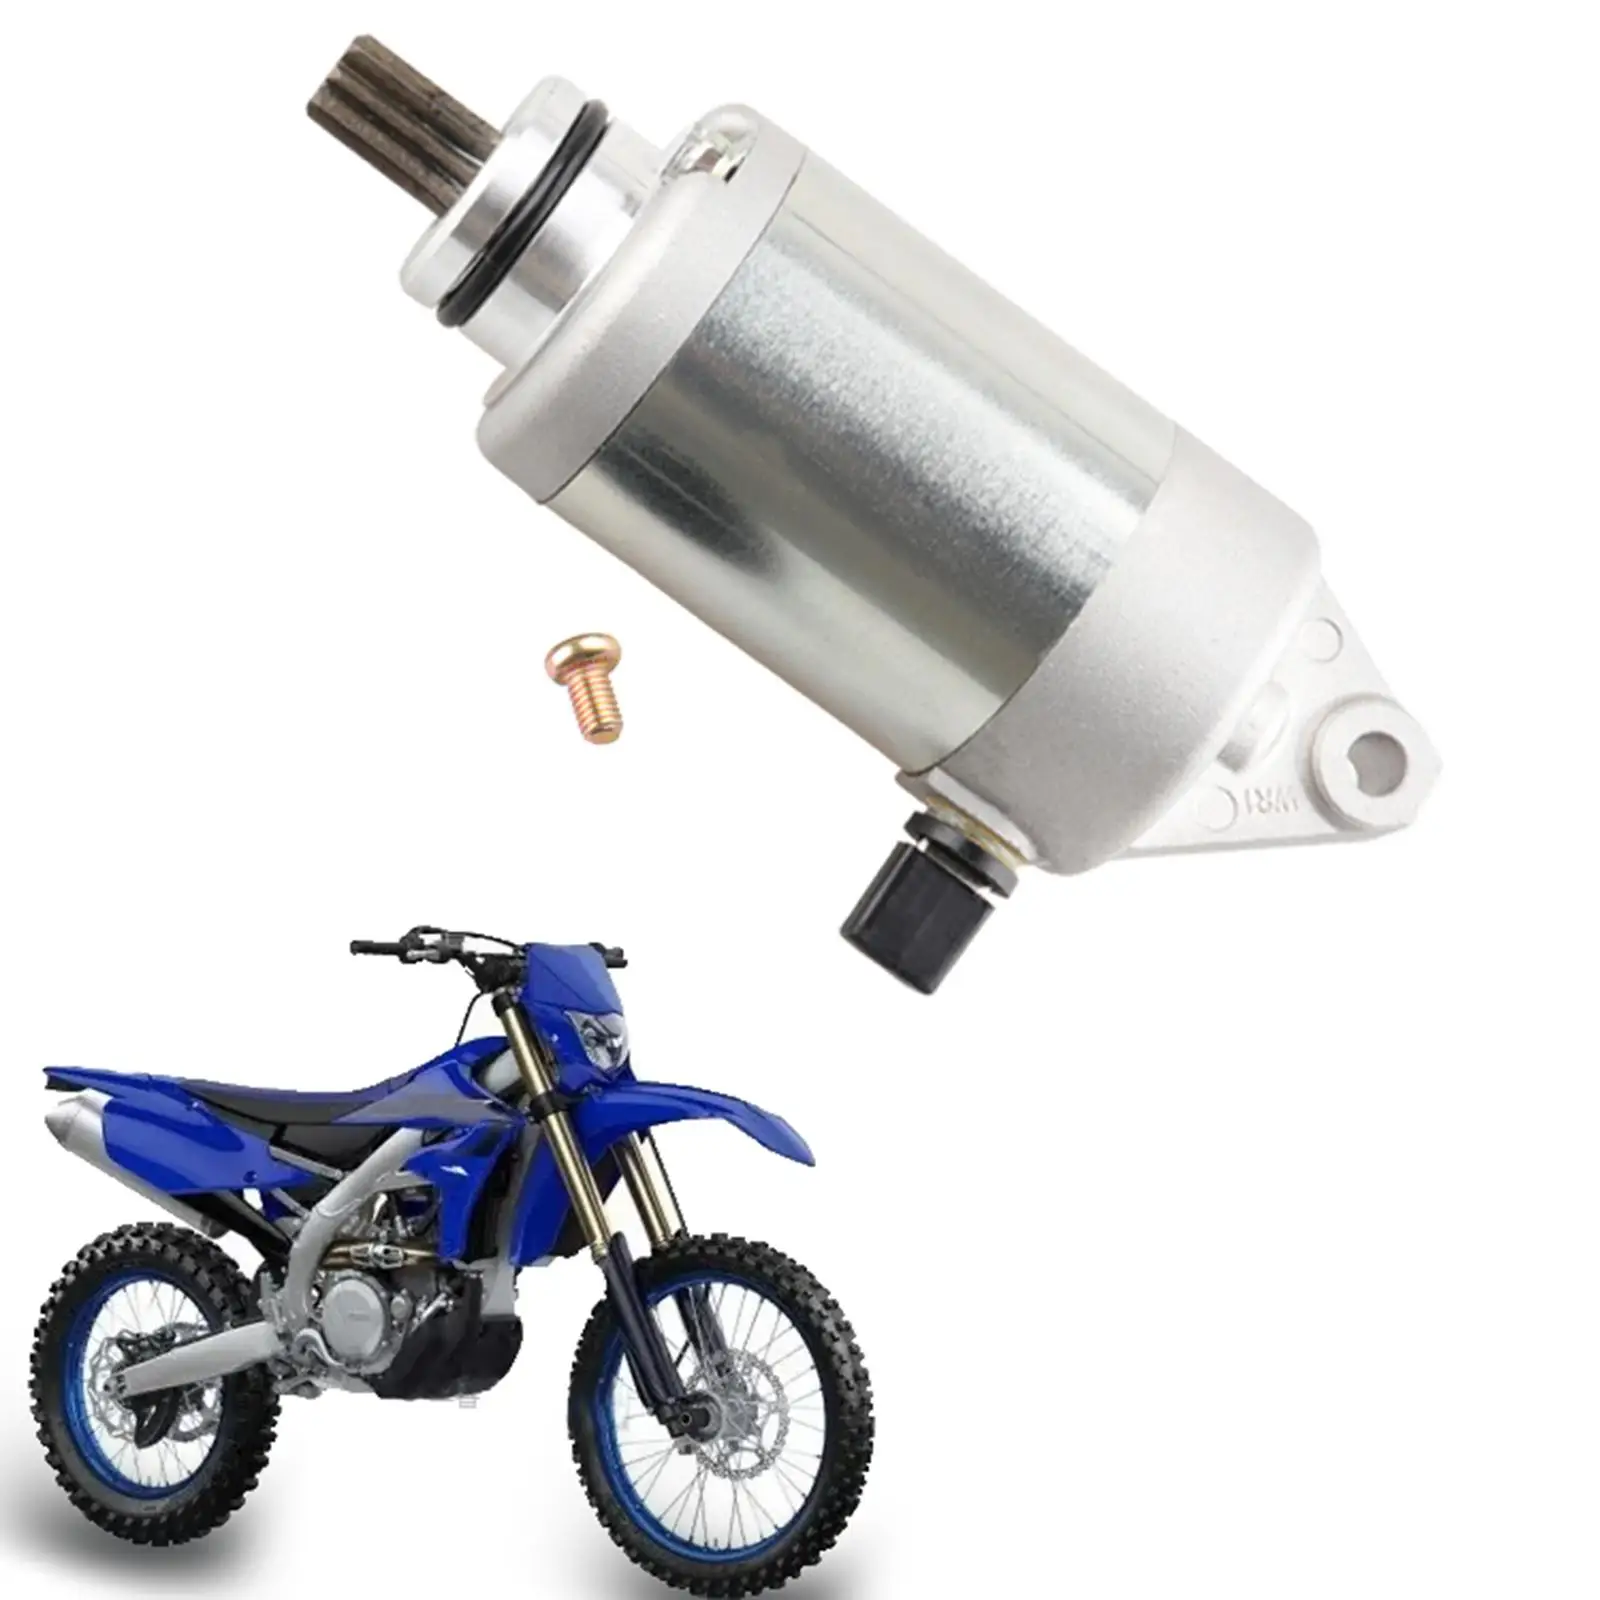 Starter Motor 2GB-81890-00 Replace Parts for Yamaha Yz250F Yz250FX